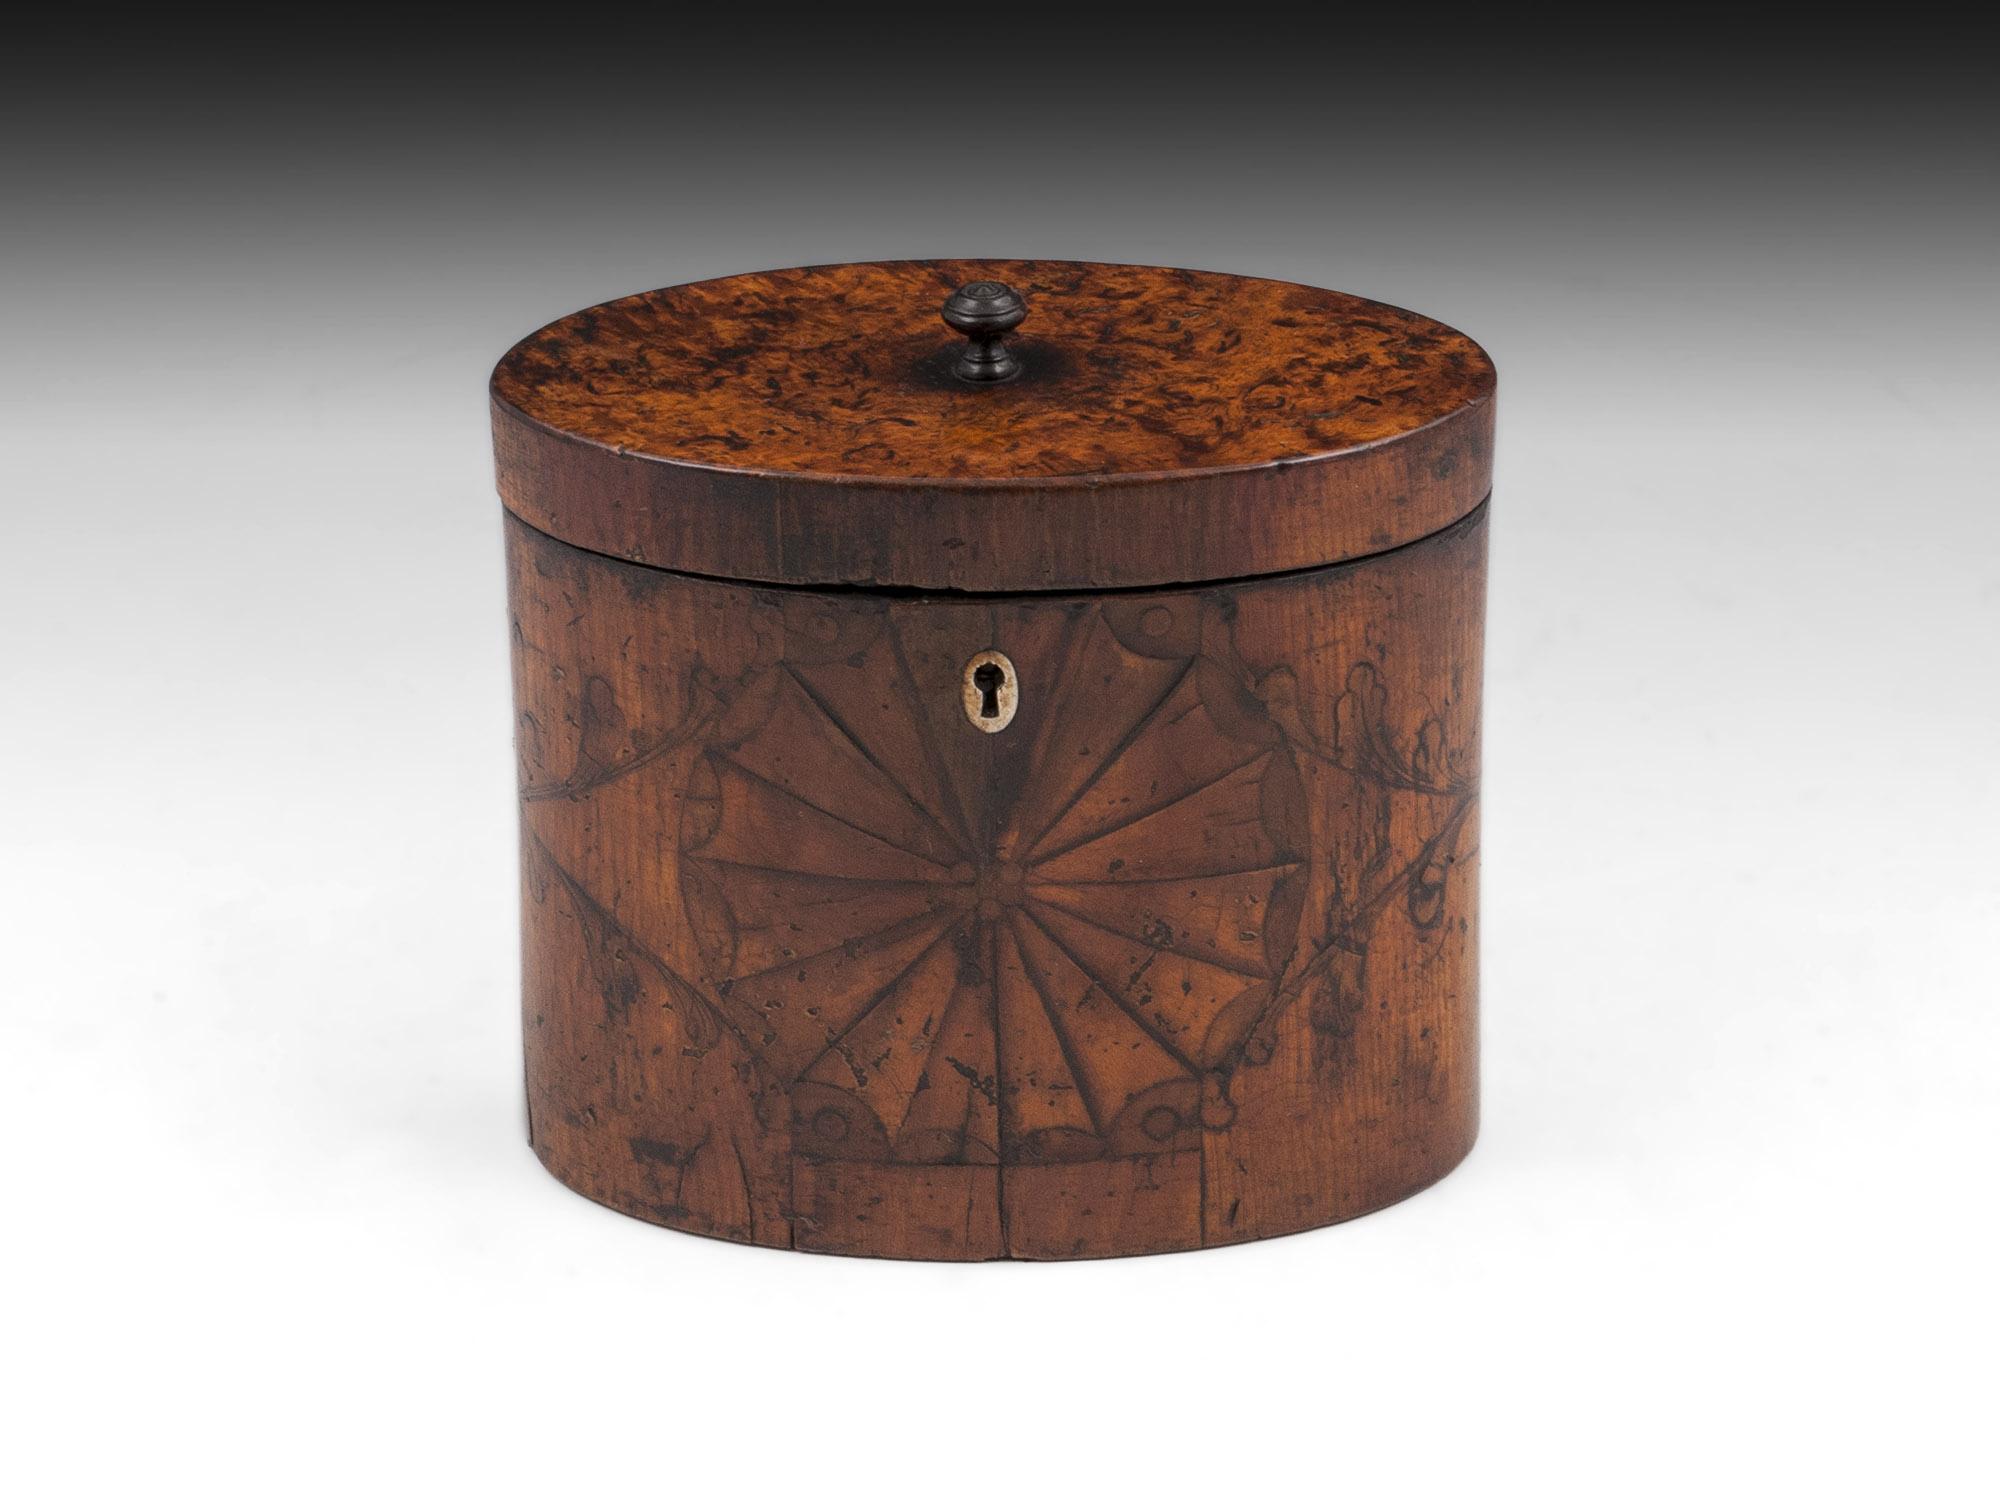 Antique oval satinwood tea caddy with unusual burr elm top with a turned handle. The front and back have wonderful batwing inlays connected by symmetrical florals with the front having a oval shaped bone escutcheon. 

The interior features traces